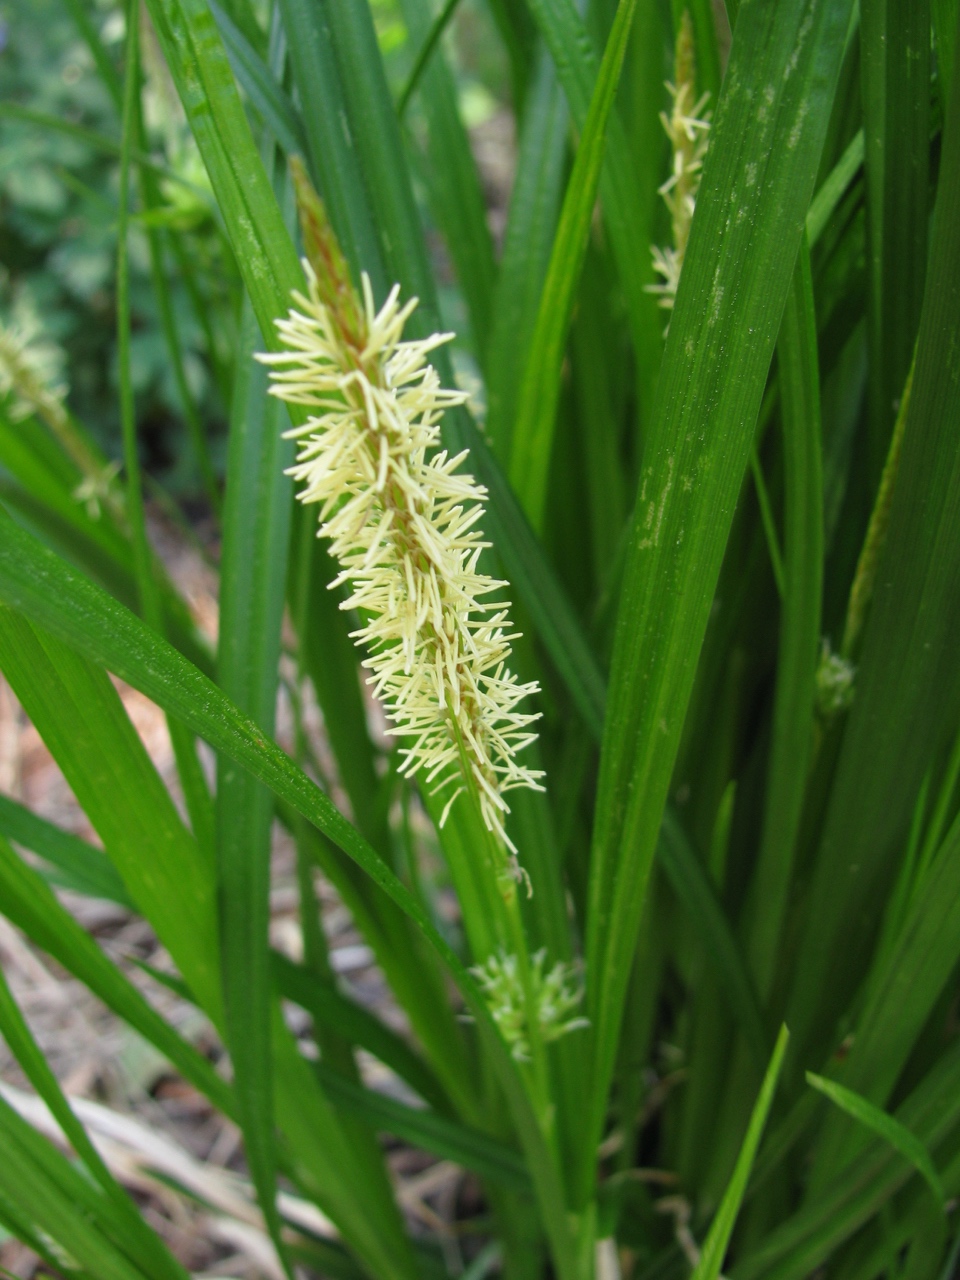 The Scientific Name is Carex grayi. You will likely hear them called Asa Gray's Sedge, Gray's Sedge, Bur Sedge. This picture shows the Staminate inflorescence in early May of Carex grayi